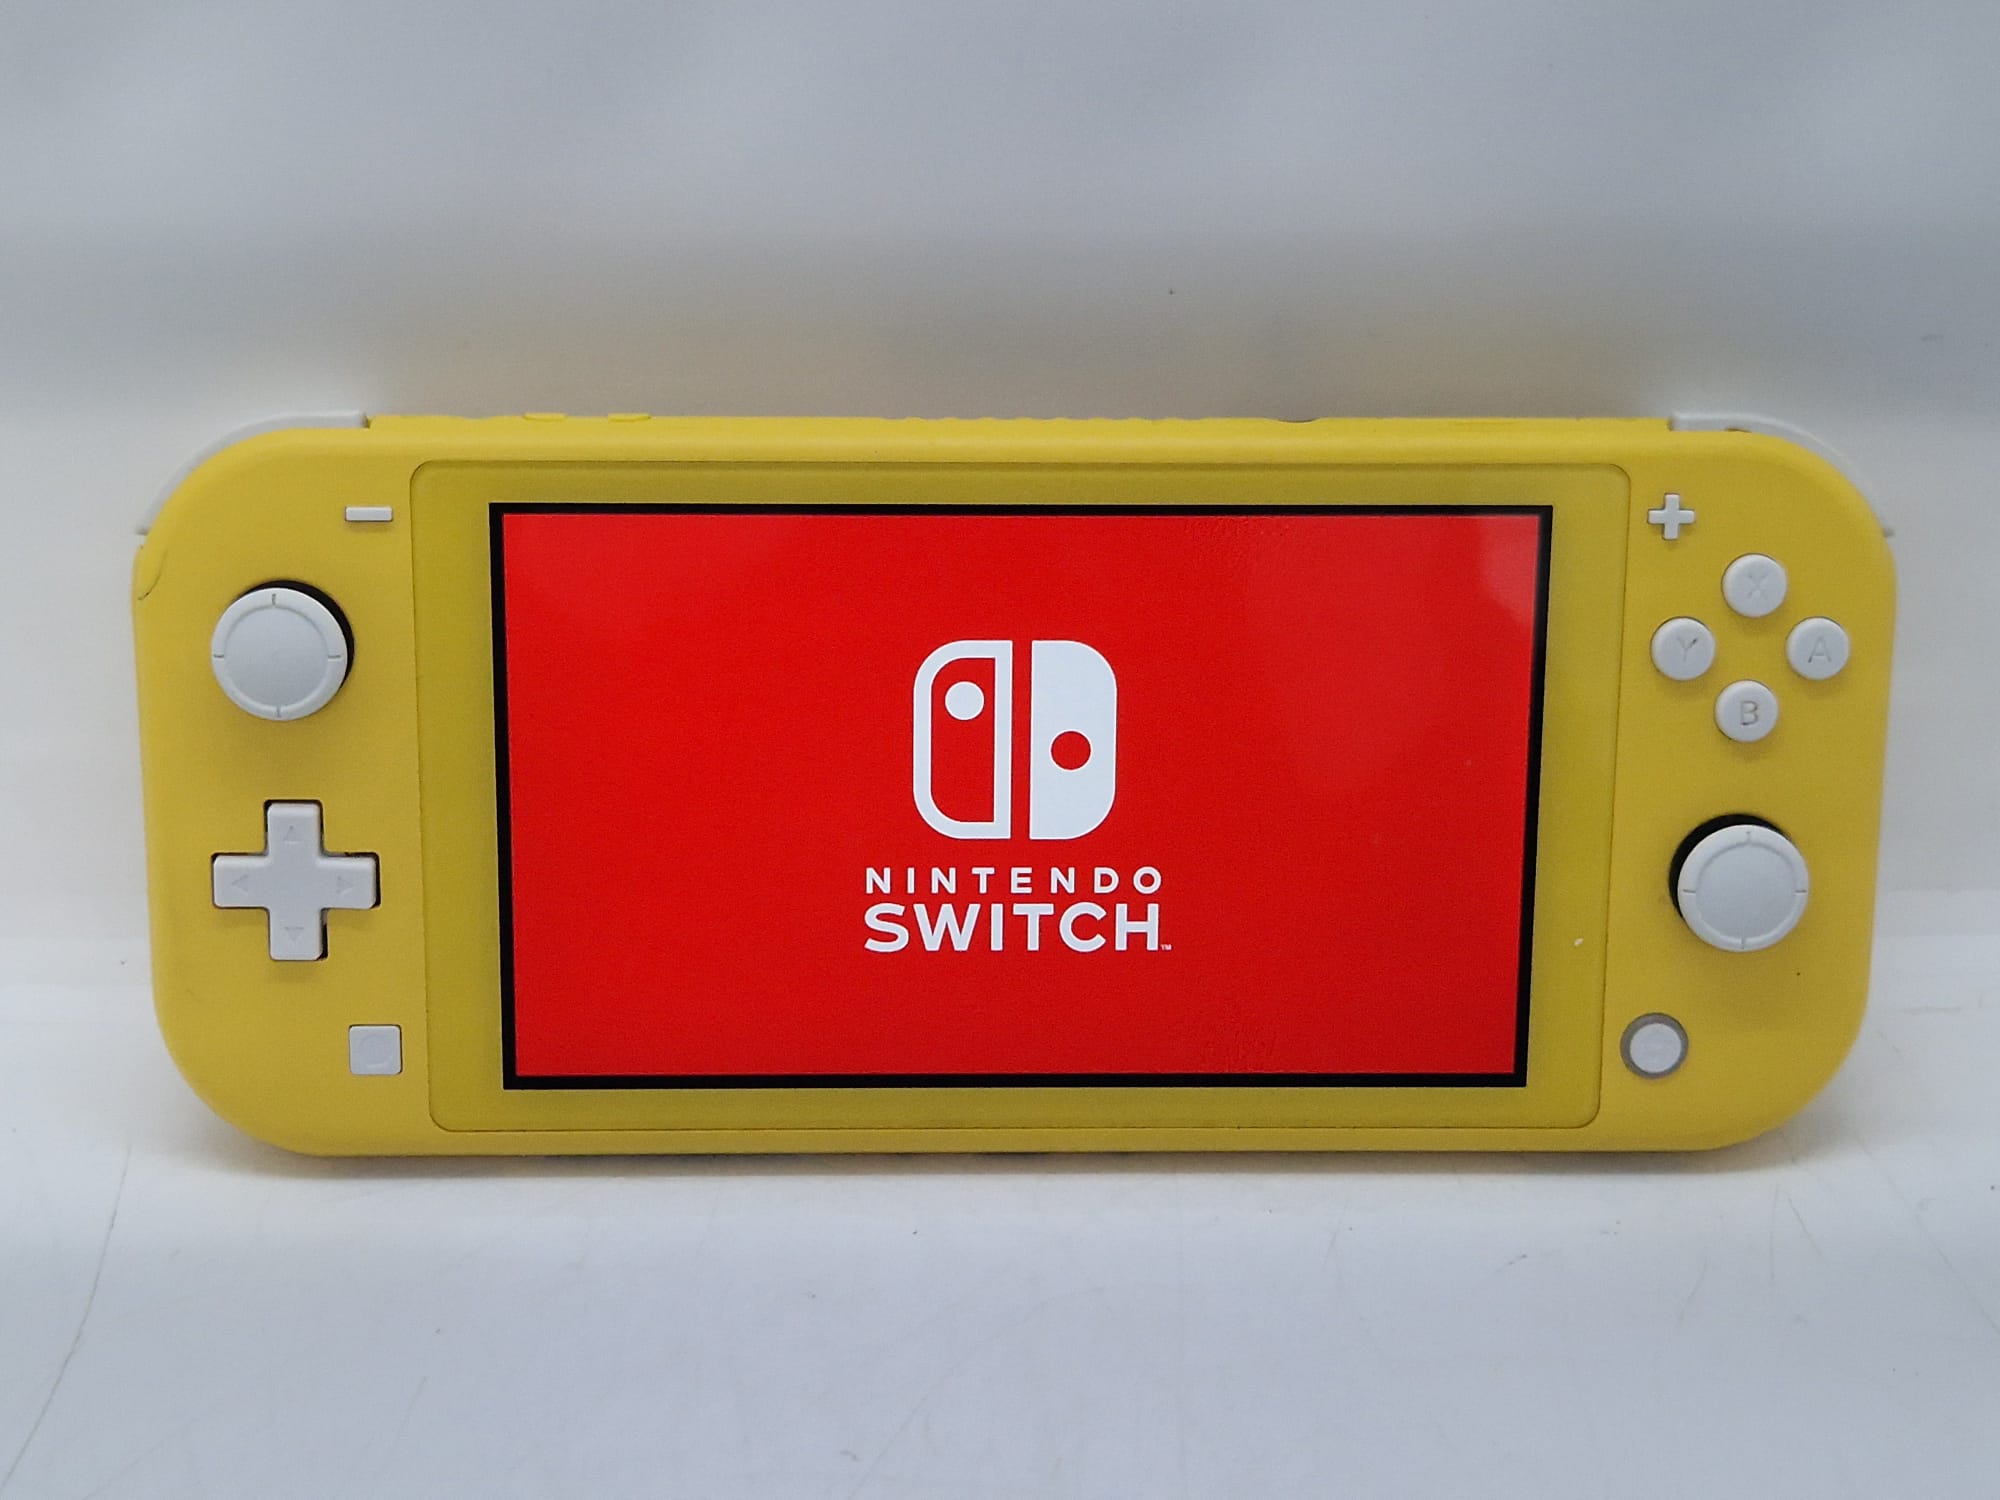 Nintendo Switch Lite 32GB Handheld System - Yellow - No Charger